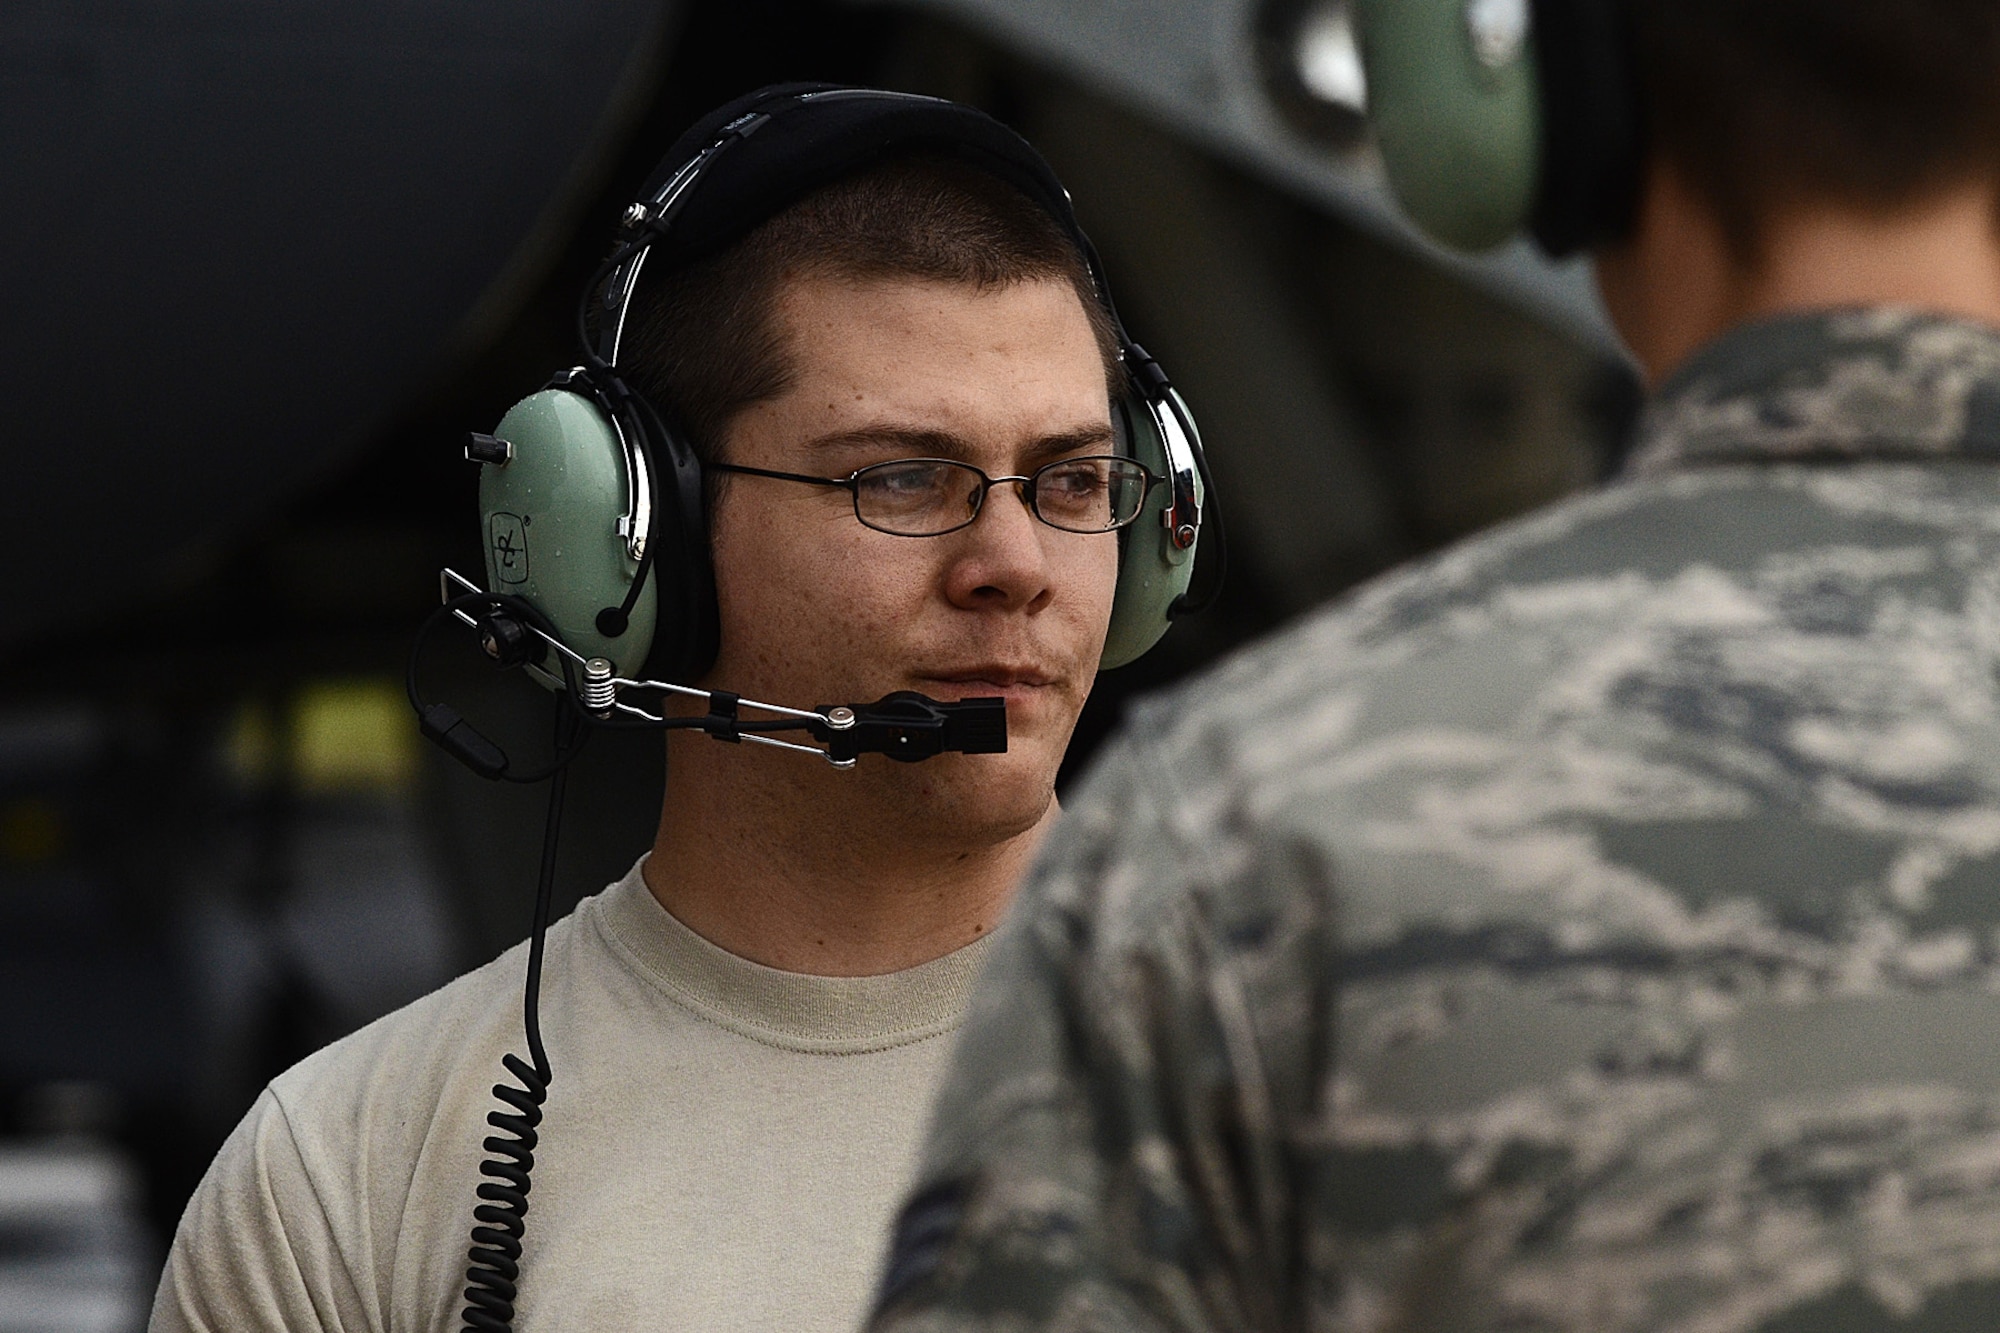 Staff Sgt. Stephen Cole, B-52 Stratofortress crew chief assigned to the 20th Expeditionary Aircraft Maintenance Squadron, talks to his wingmen during preflight operations Aug. 22, 2015, at Andersen Air Force Base, Guam.  Bomber crews with the 20th Expeditionary Bomb Squadron are part of U.S. Pacific Command’s continuous bomber presence and support ongoing operations in the Indo-Asia-Pacific region. (U.S. Air Force photo by Staff Sgt. Alexander W. Riedel/Released)